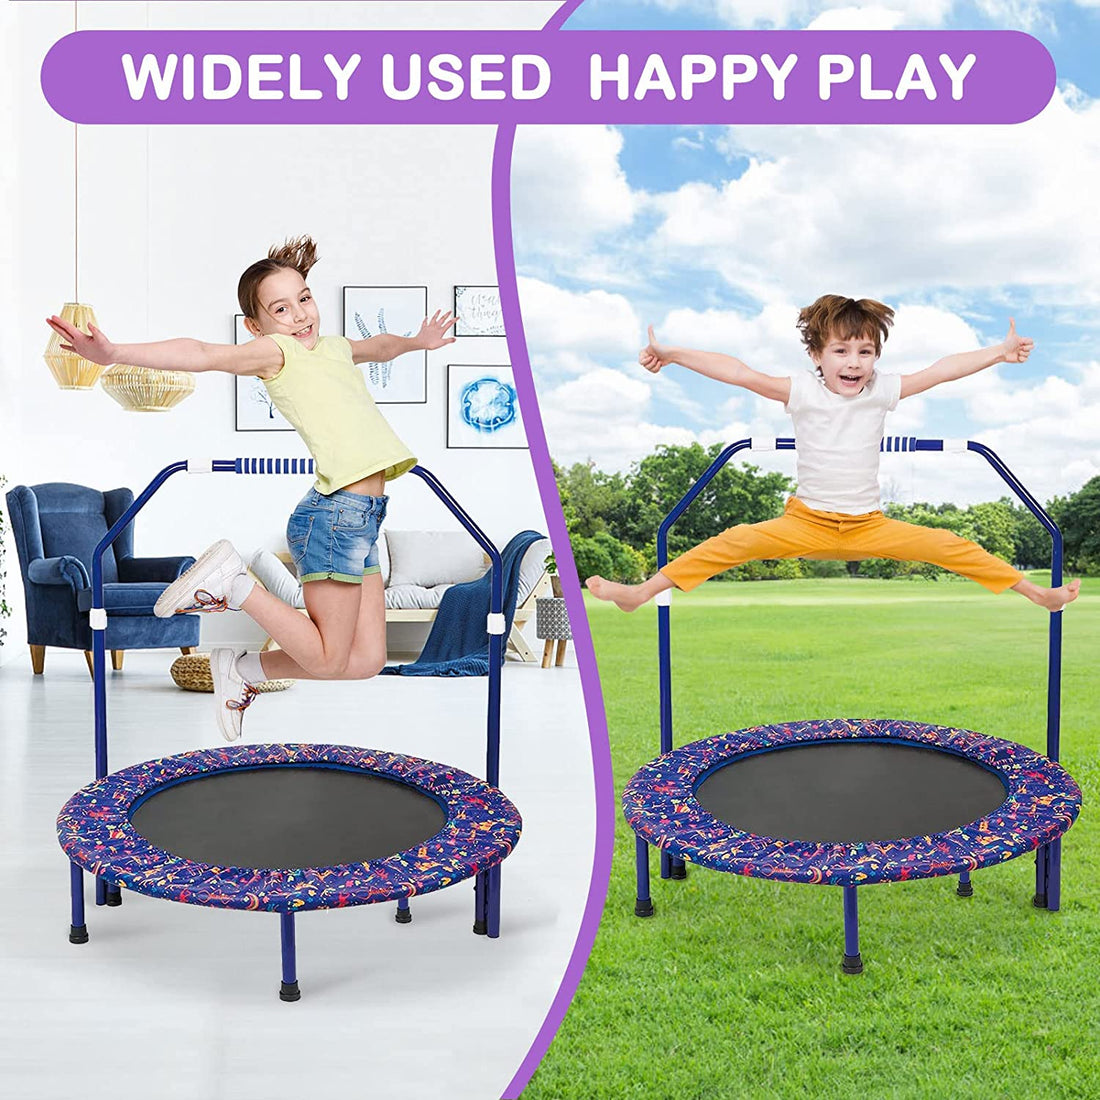 EALING BABY 36'' Kids Trampoline-Mini Trampoline With Foldable Bungee -Toddler TrampolineWith Rebounder Adjustable Handrail And Padded Cover -Black -Purple Outdoor-Indoor Trampoline For Exercise